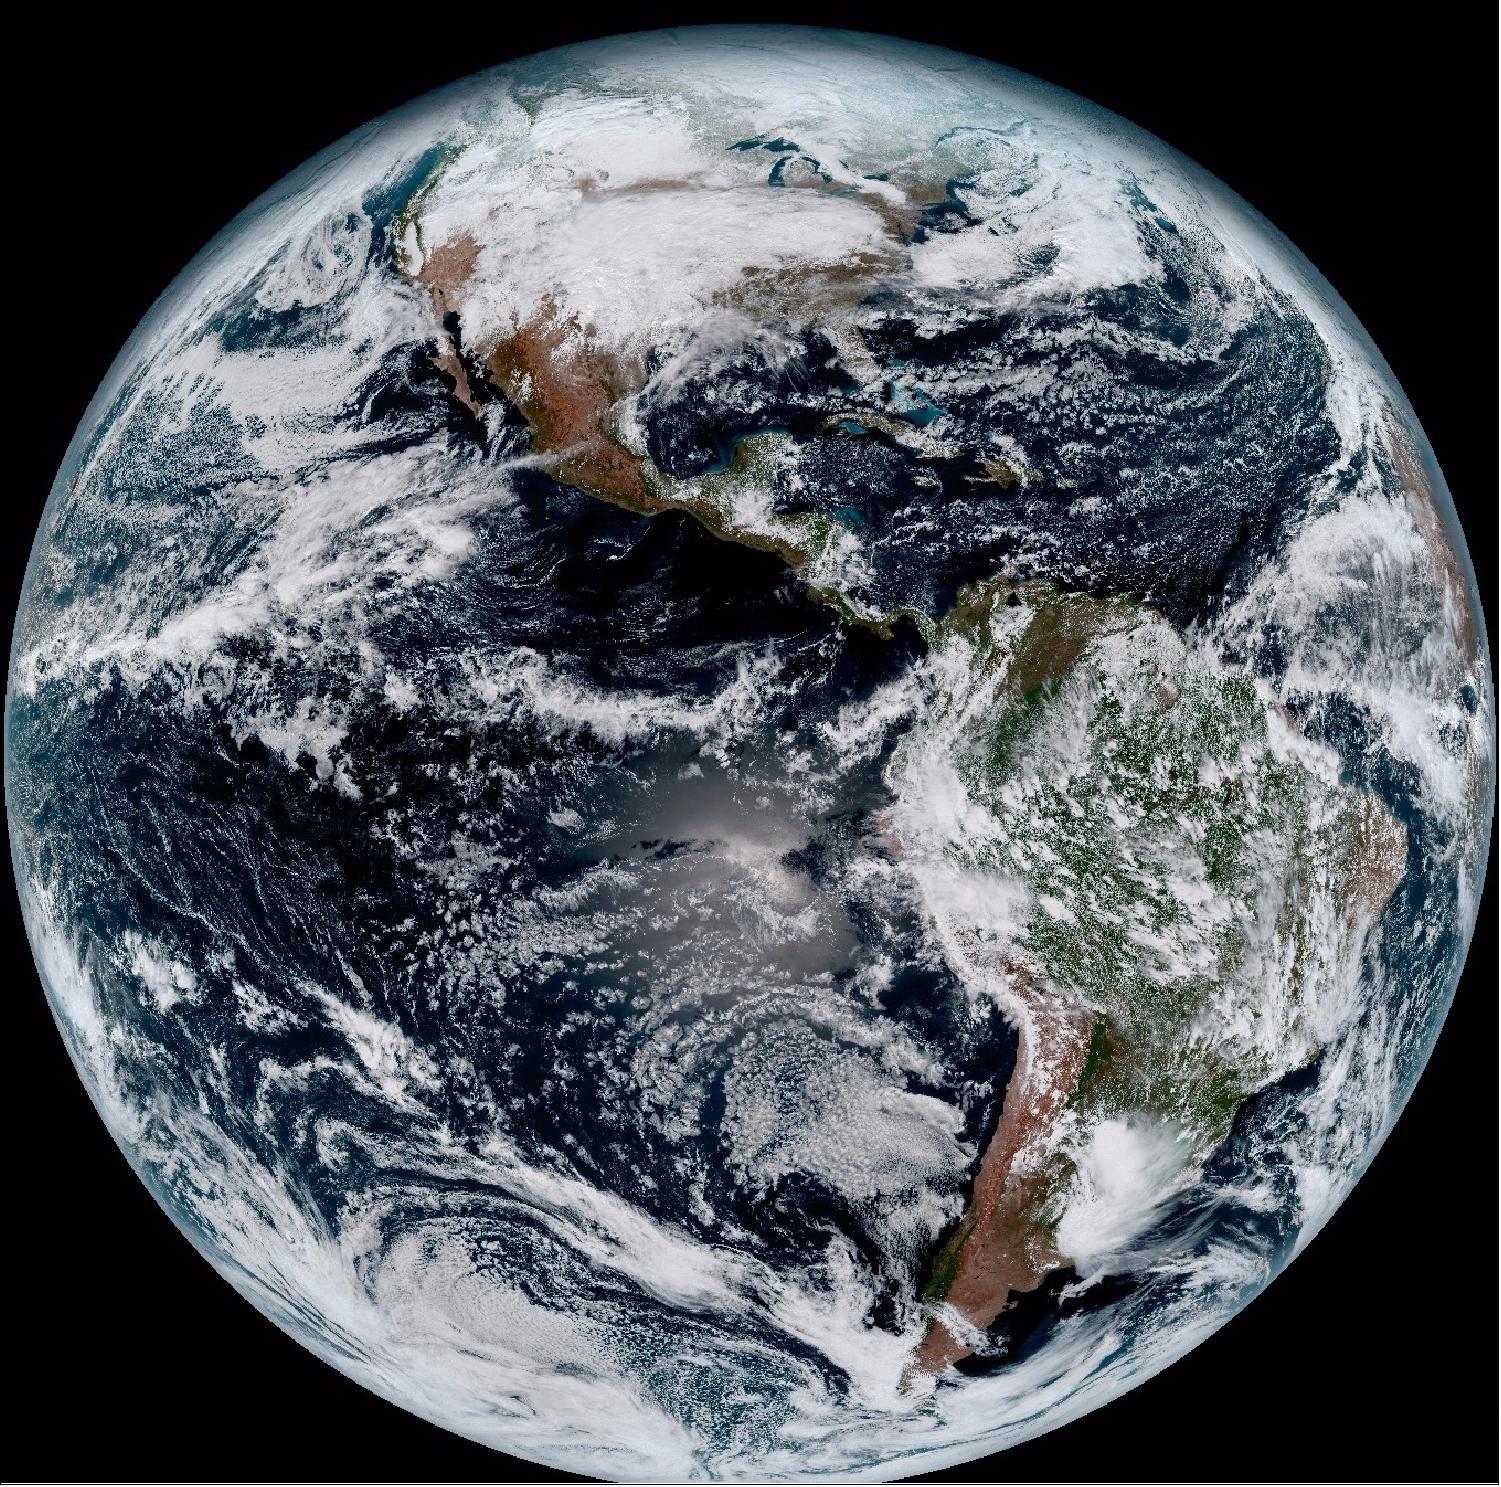 Figure 22: This composite color full-disk visible image of the Western Hemisphere was captured from NOAA GOES-16 satellite on Jan. 15, 2017 and was created using several of the 16 spectral channels available on the satellite's ABI (Advanced Baseline Imager). The image shows North and South America and the surrounding oceans (image credit: NOAA)